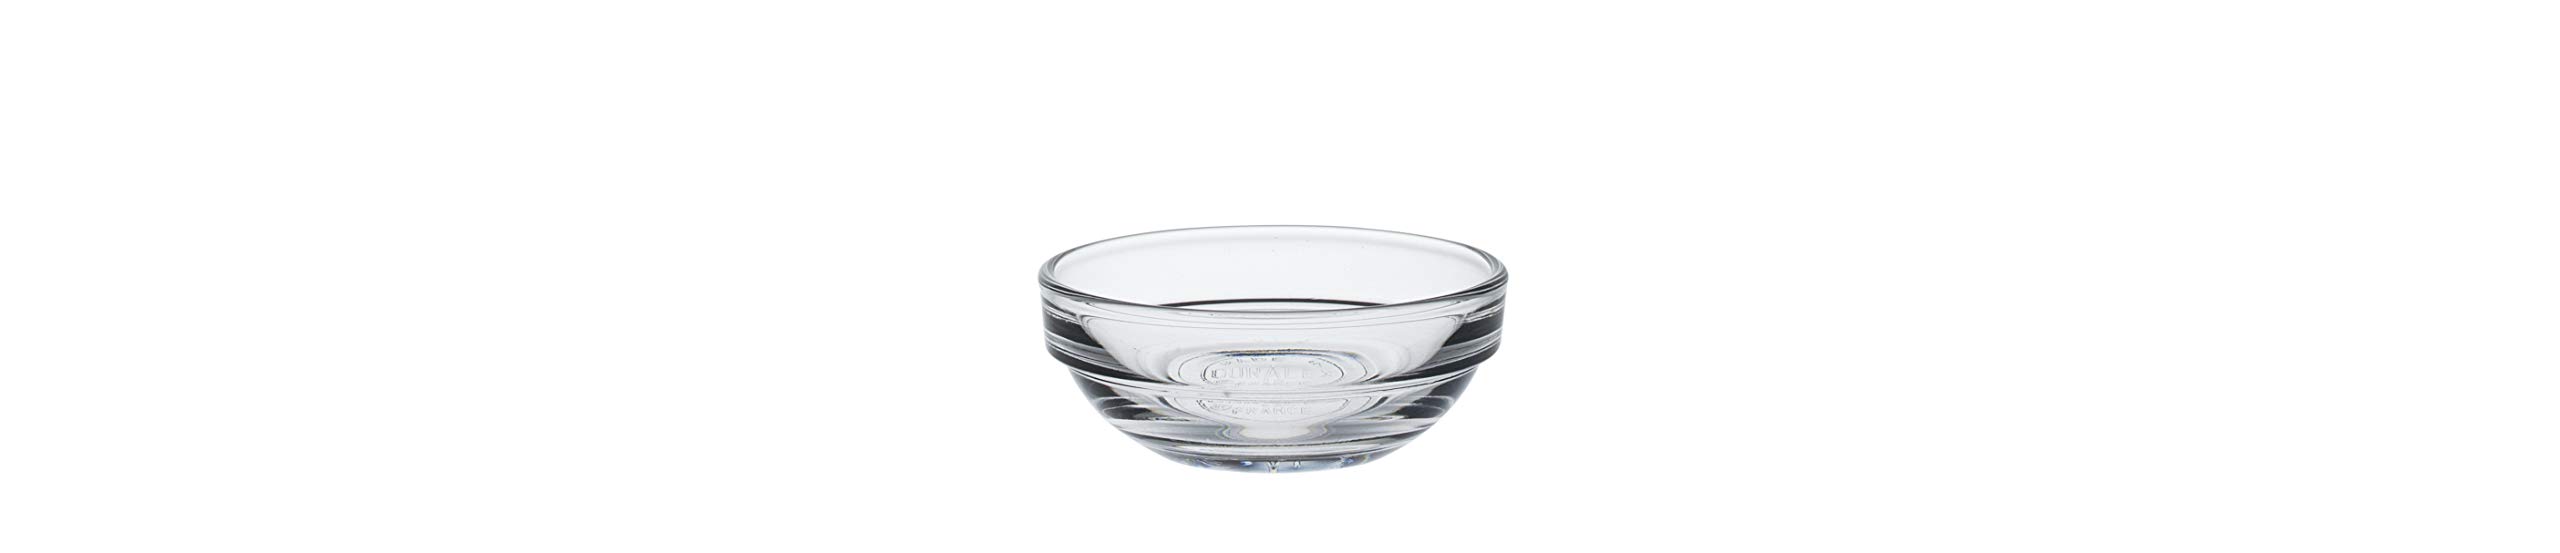 Duralex Made In France Lys Stackable Glass Bowl (Set of 4), 1 oz., 2.3 Inches, Clear